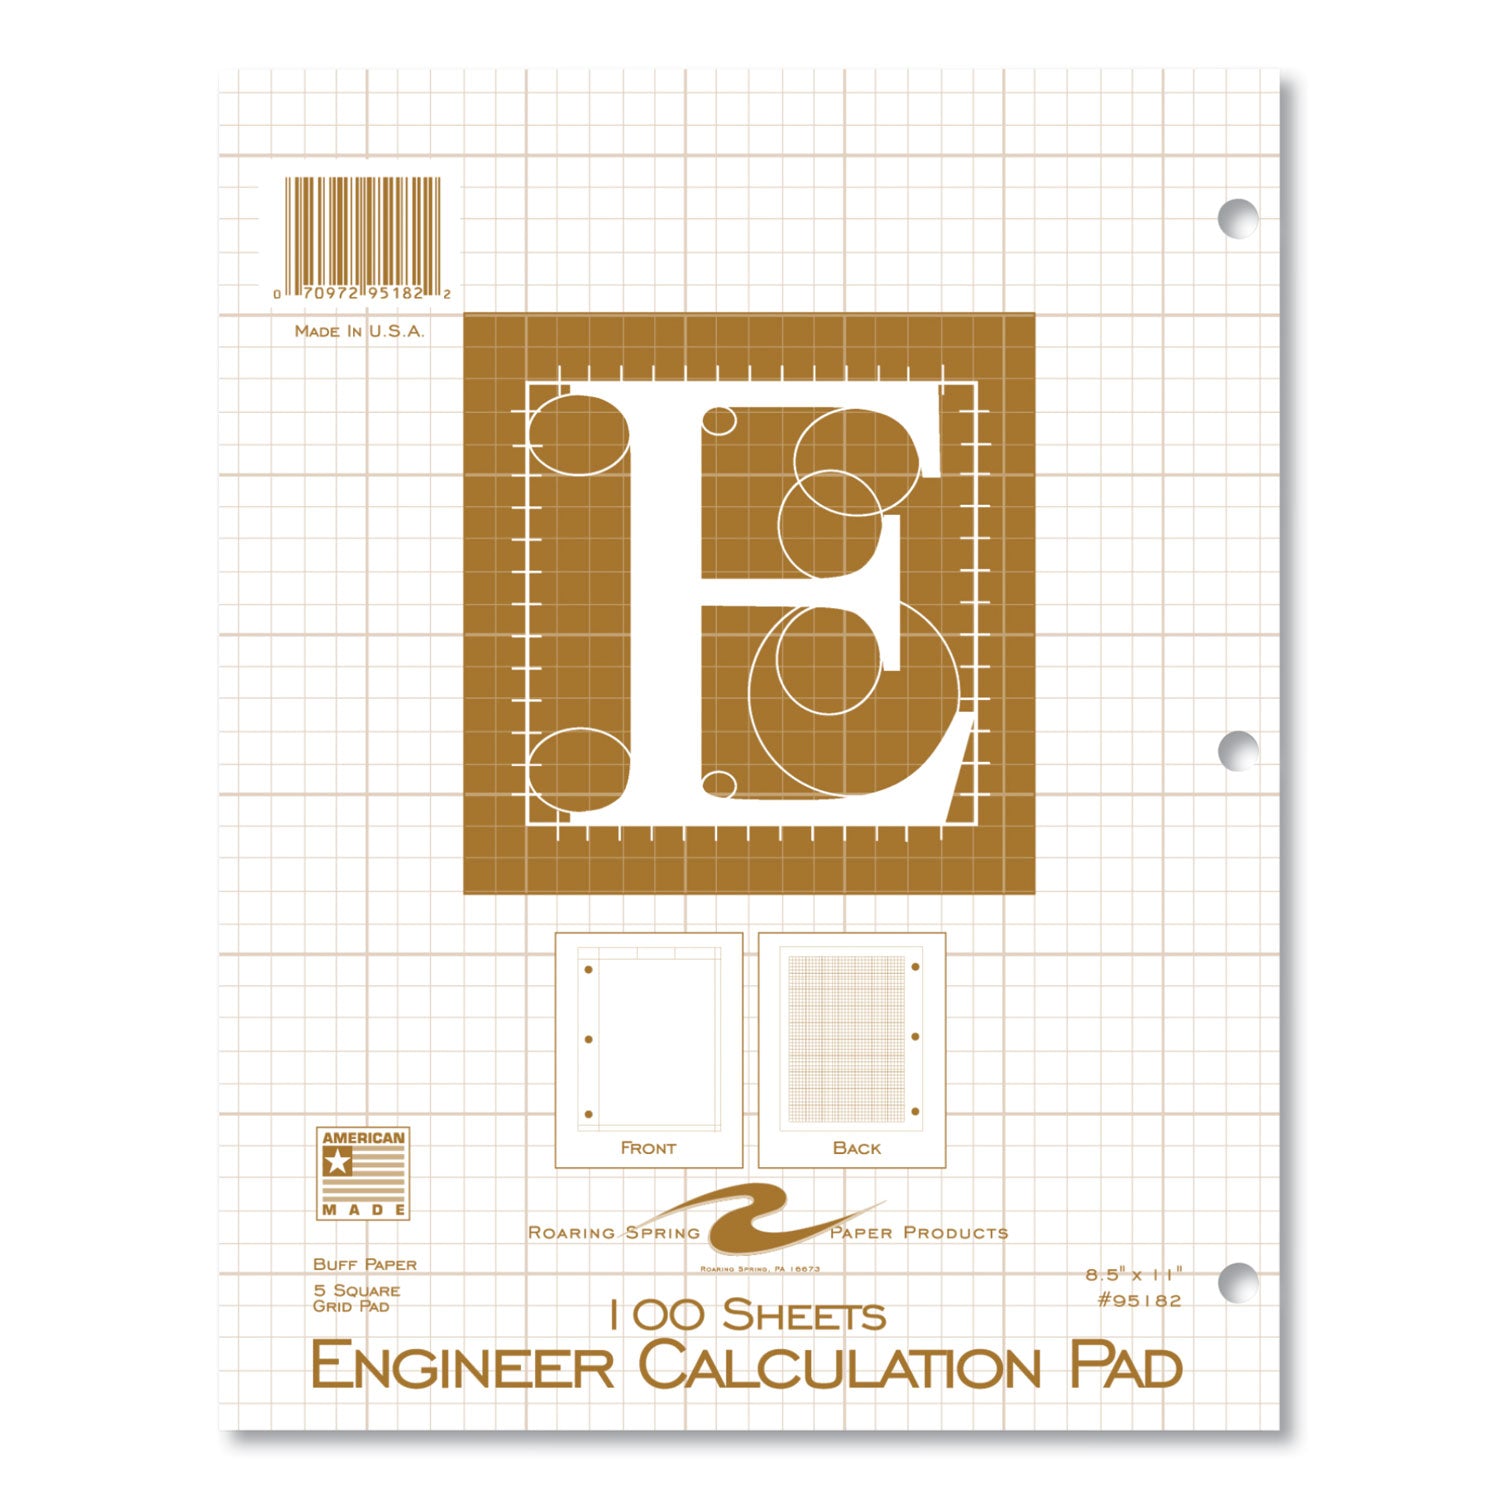 engineer-pad-quadrille-rule-5-sq-in-100-buff-85-x-11-sheets-24-carton-ships-in-4-6-business-days_roa95182cs - 2